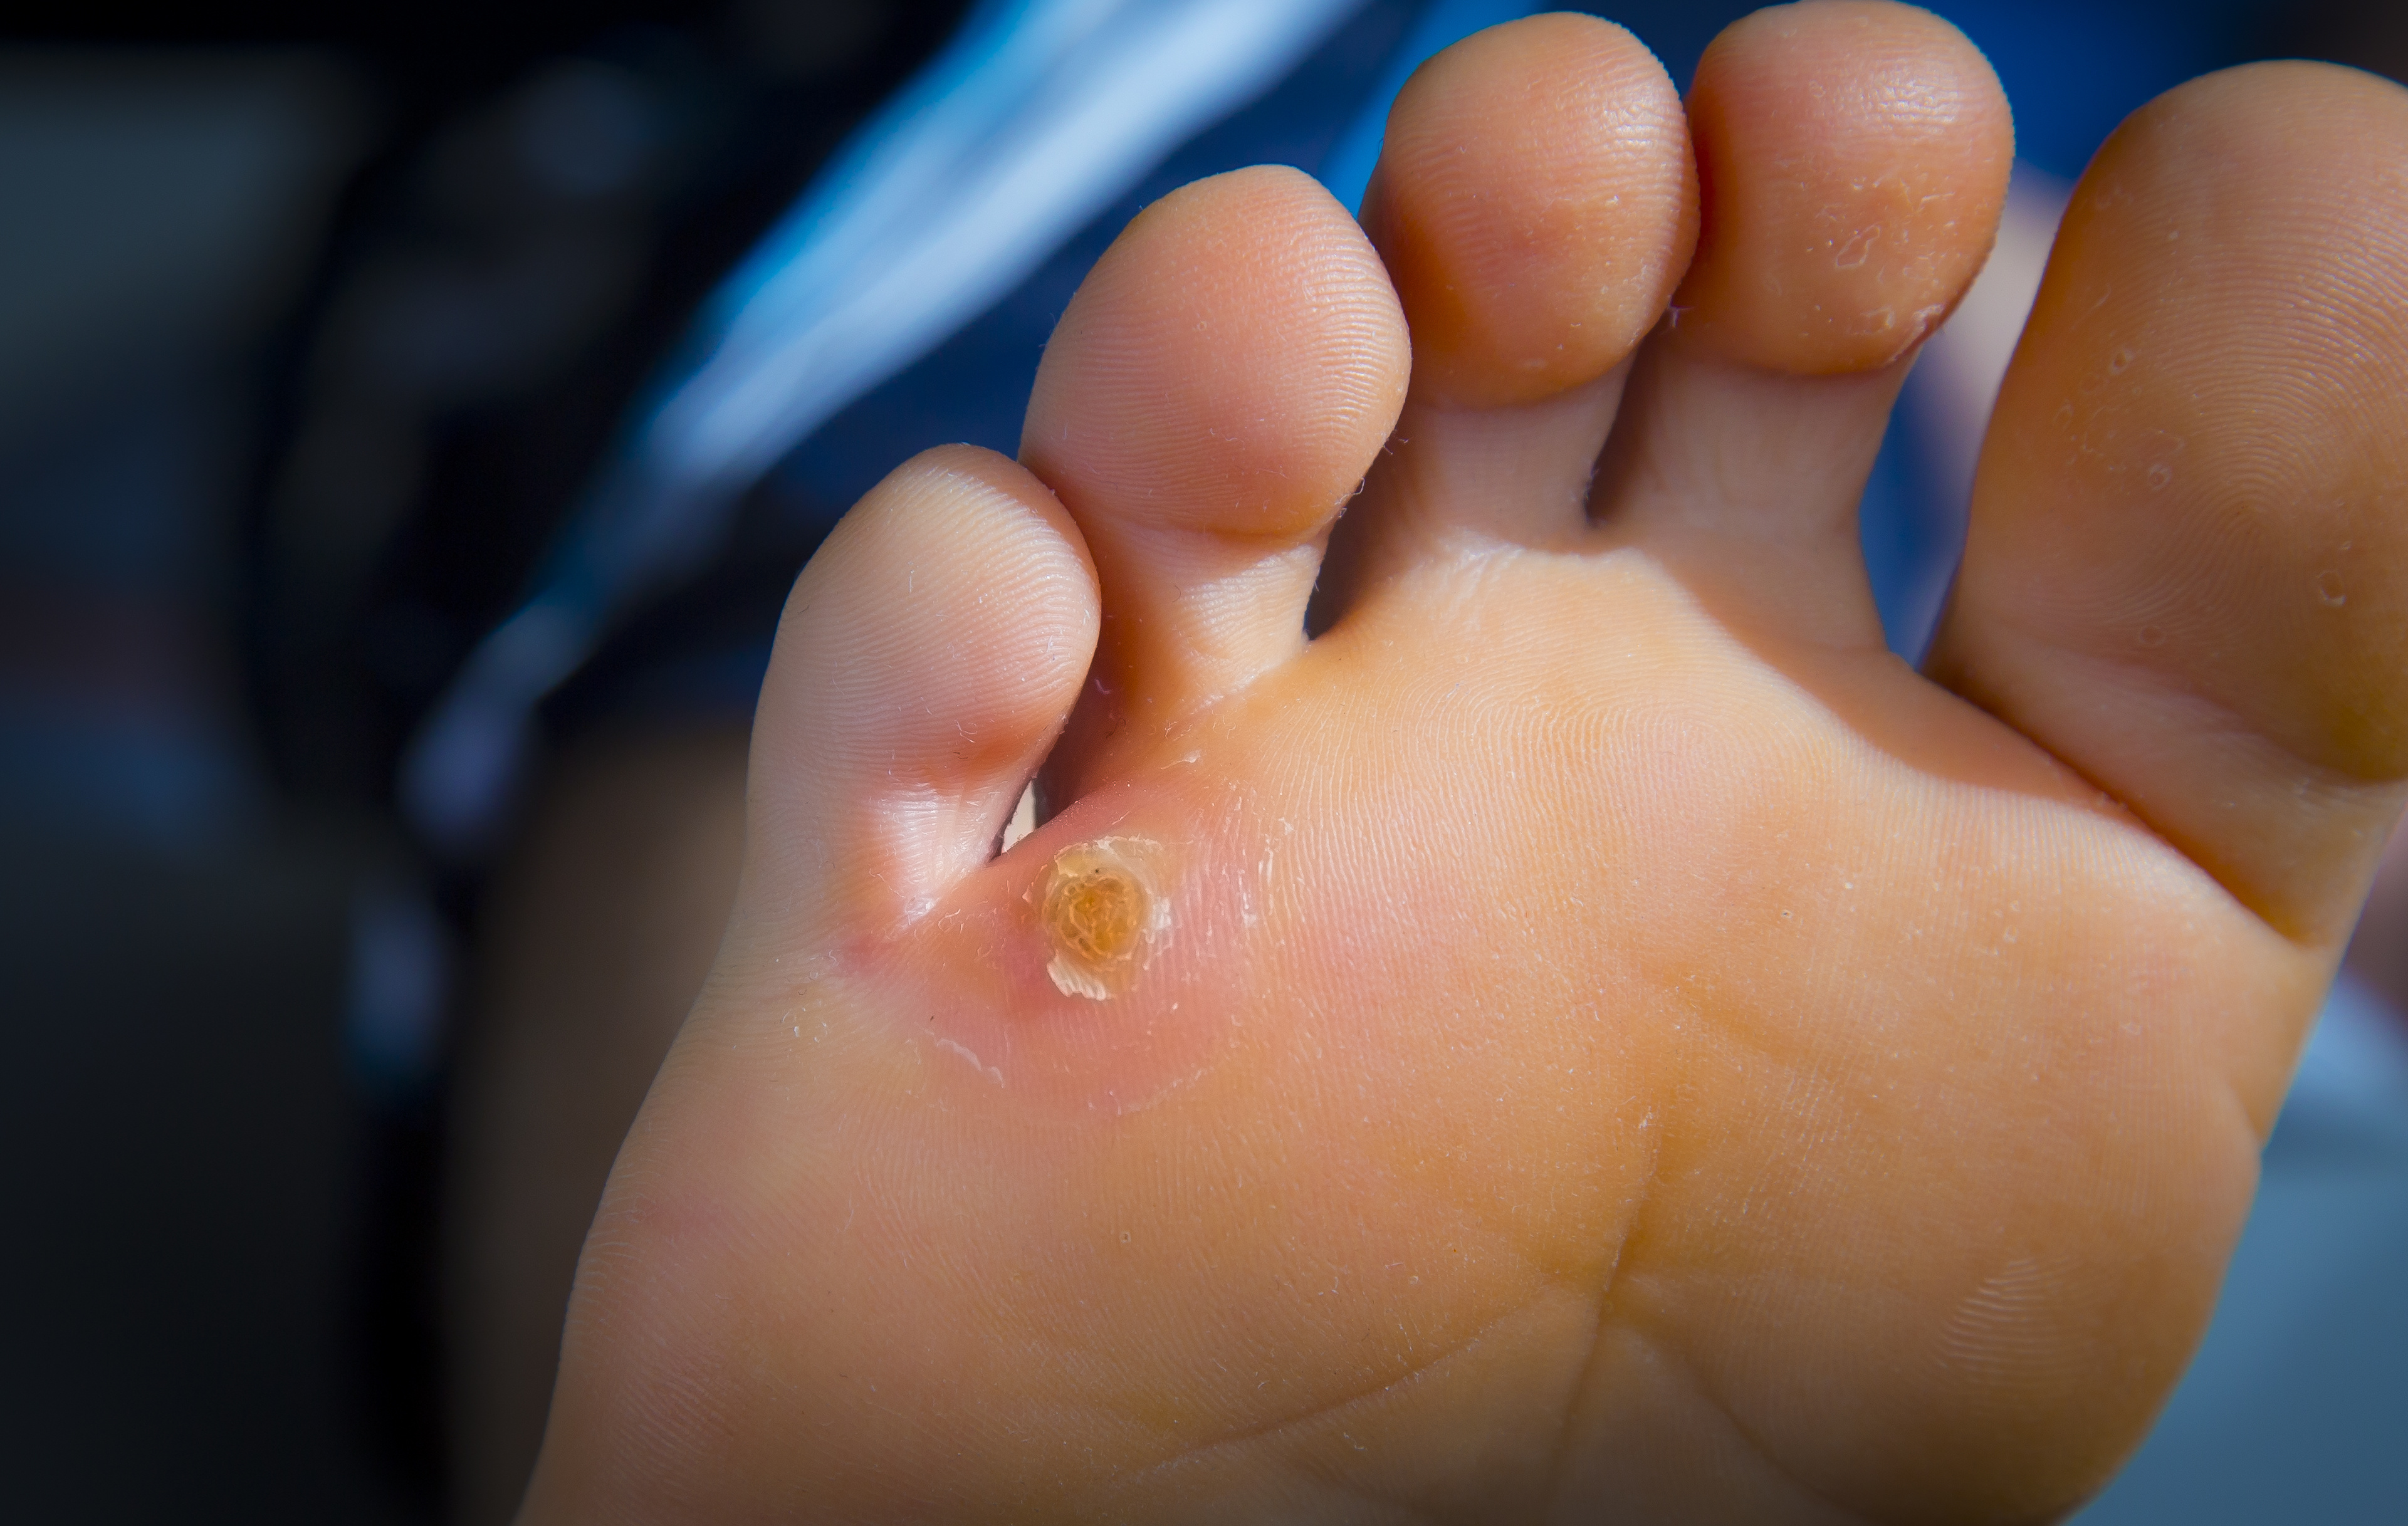 Foot Calluses, Why They Develop & How to Treat Them